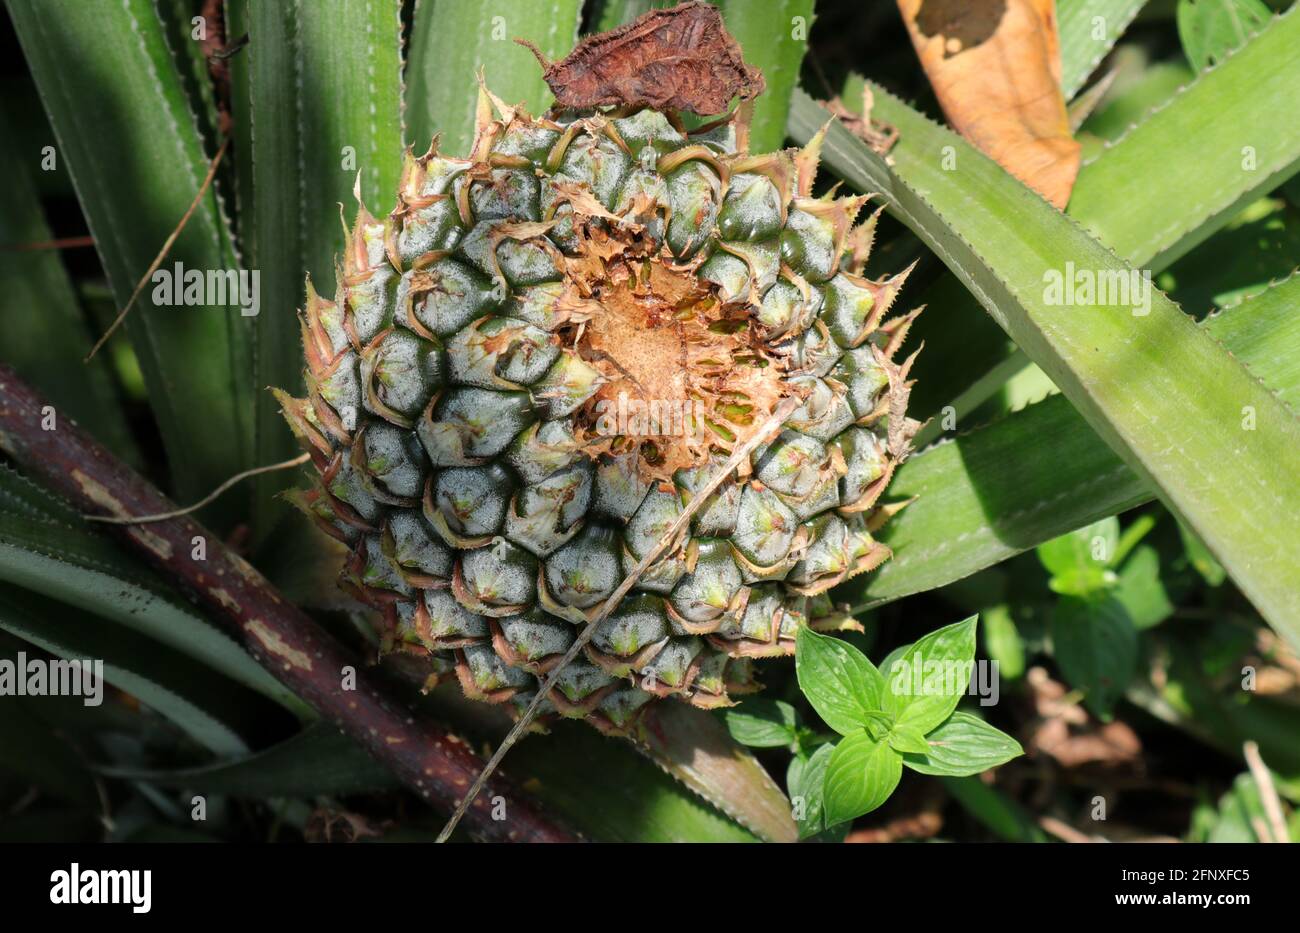 An animal damaged raw pineapple in a pineapple plantation Stock Photo